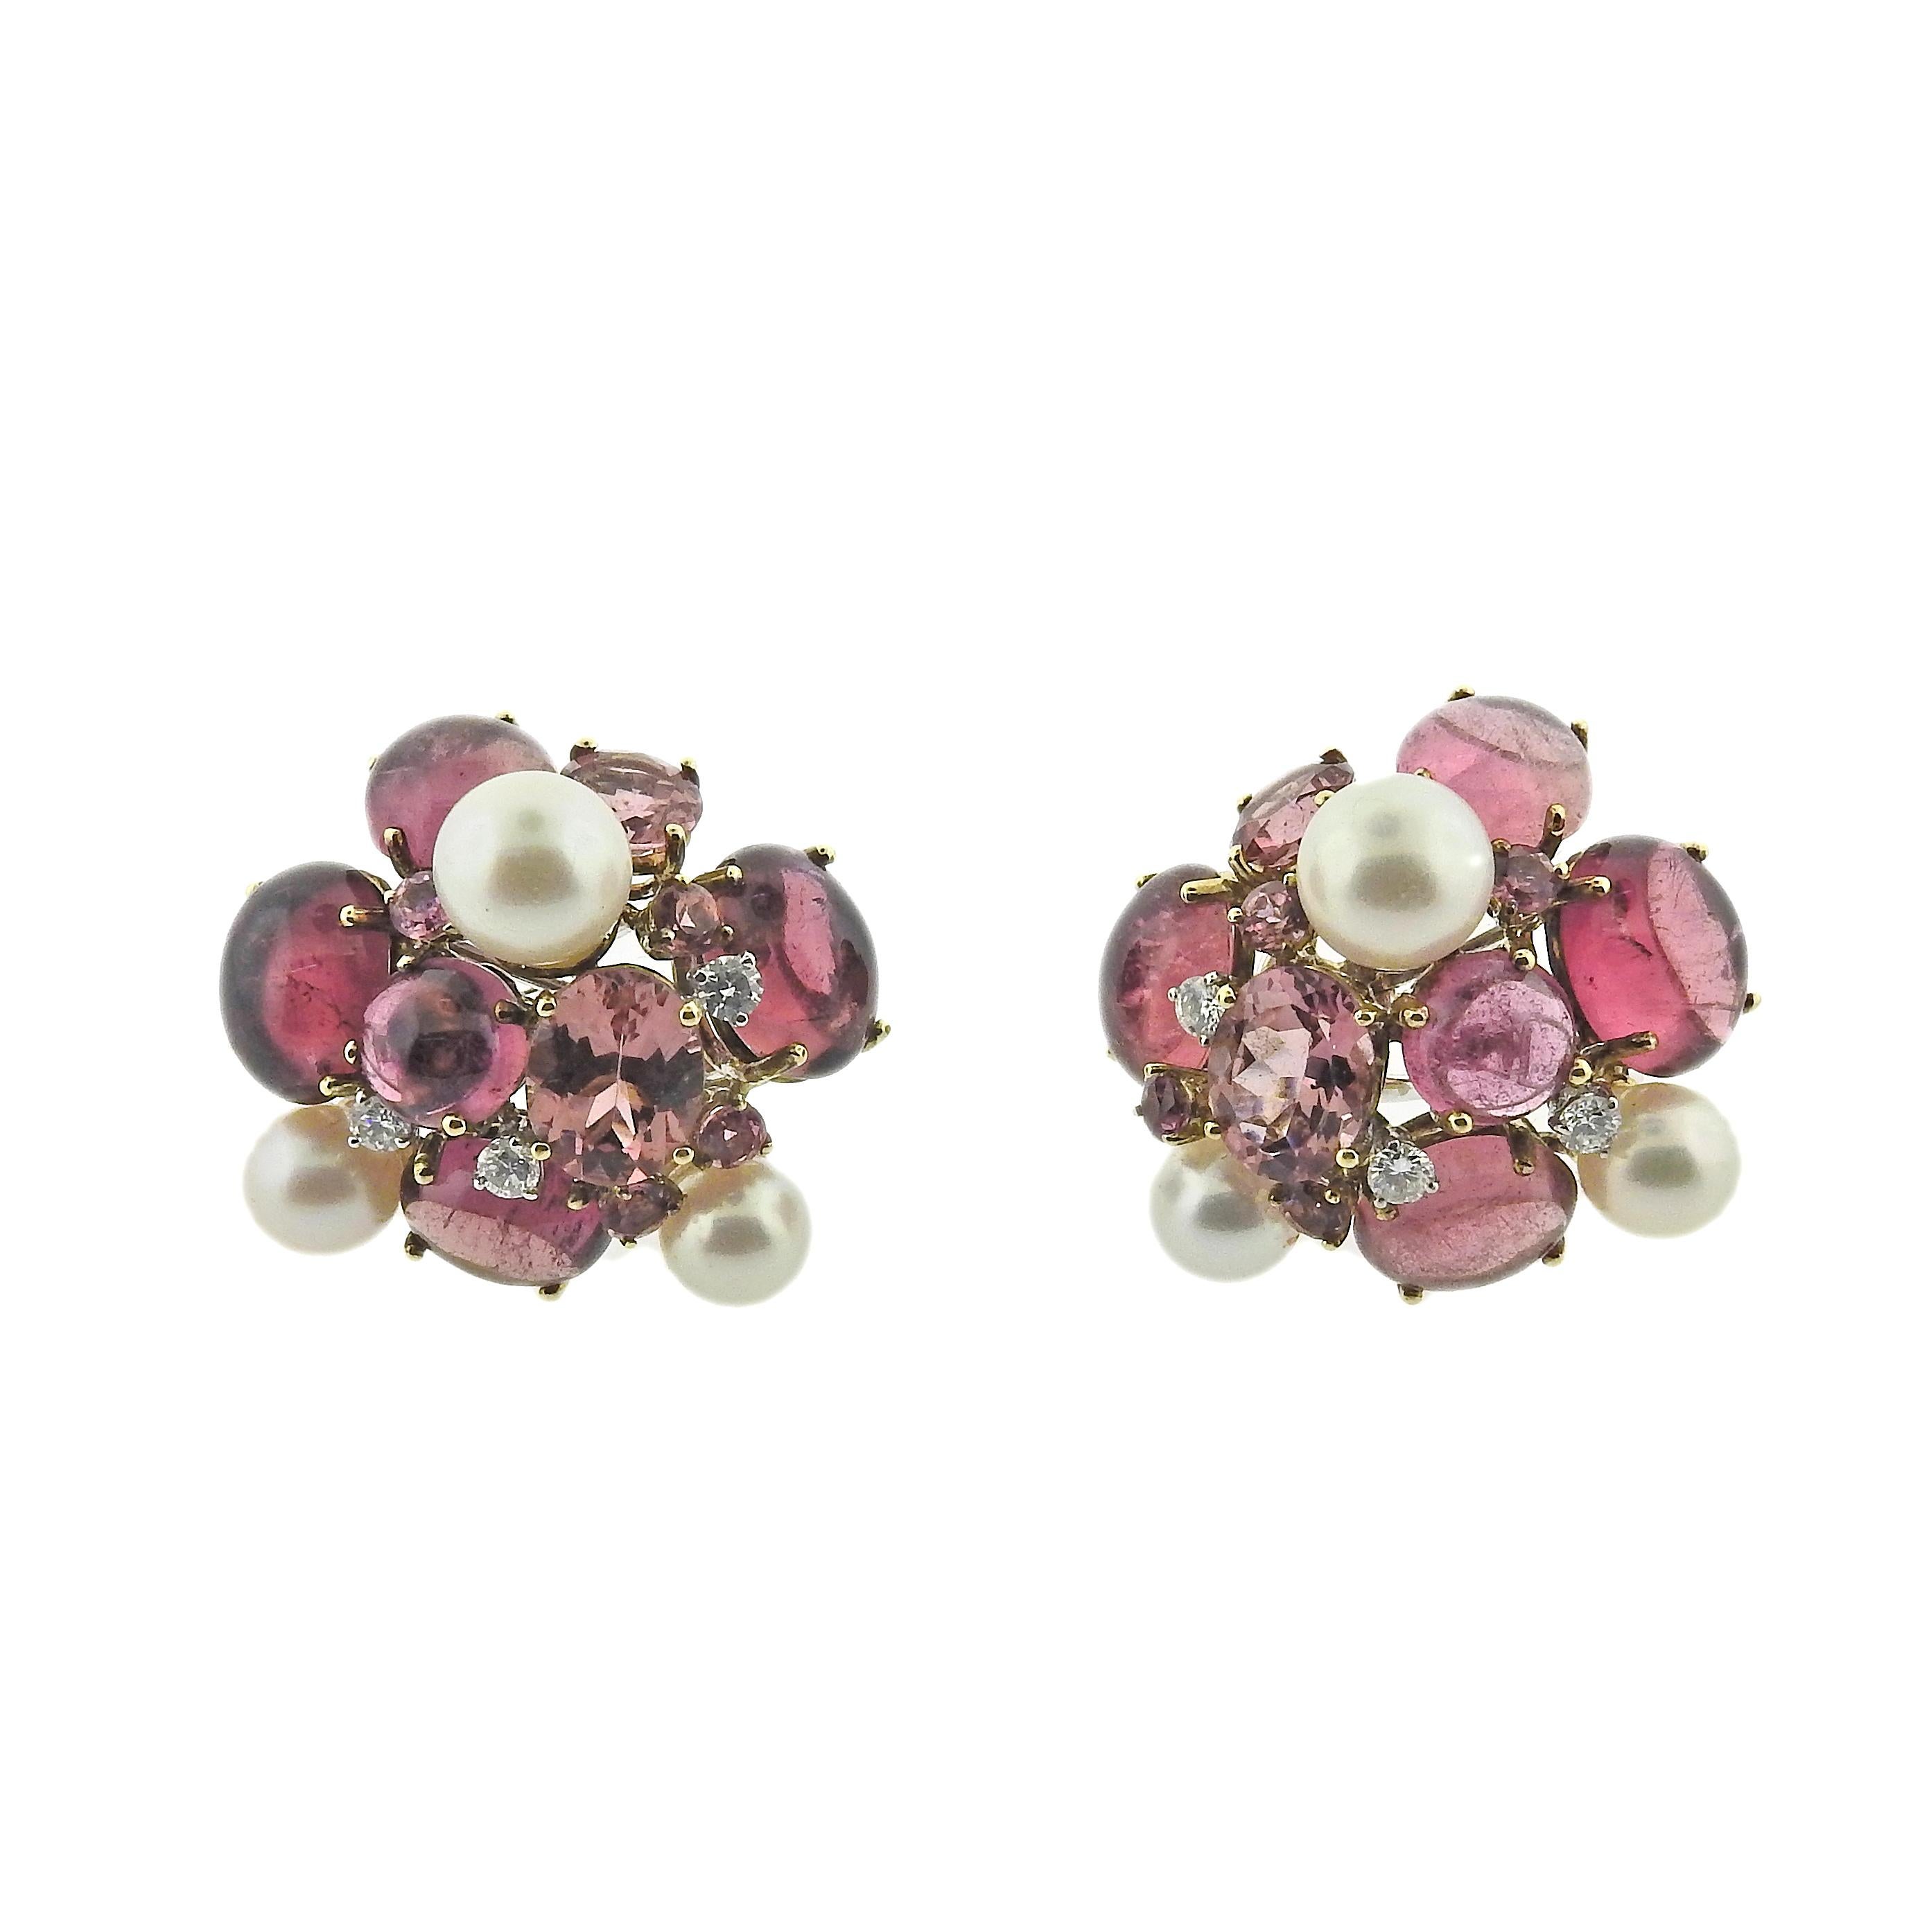 18k gold Pink Tourmaline Pearl Diamond Cluster Earrings. Featuring 0.30ctw of VS/GH diamond. earrings measure 26mm x 25mm. Tested 18K gold. Weight is 22.1 gram.